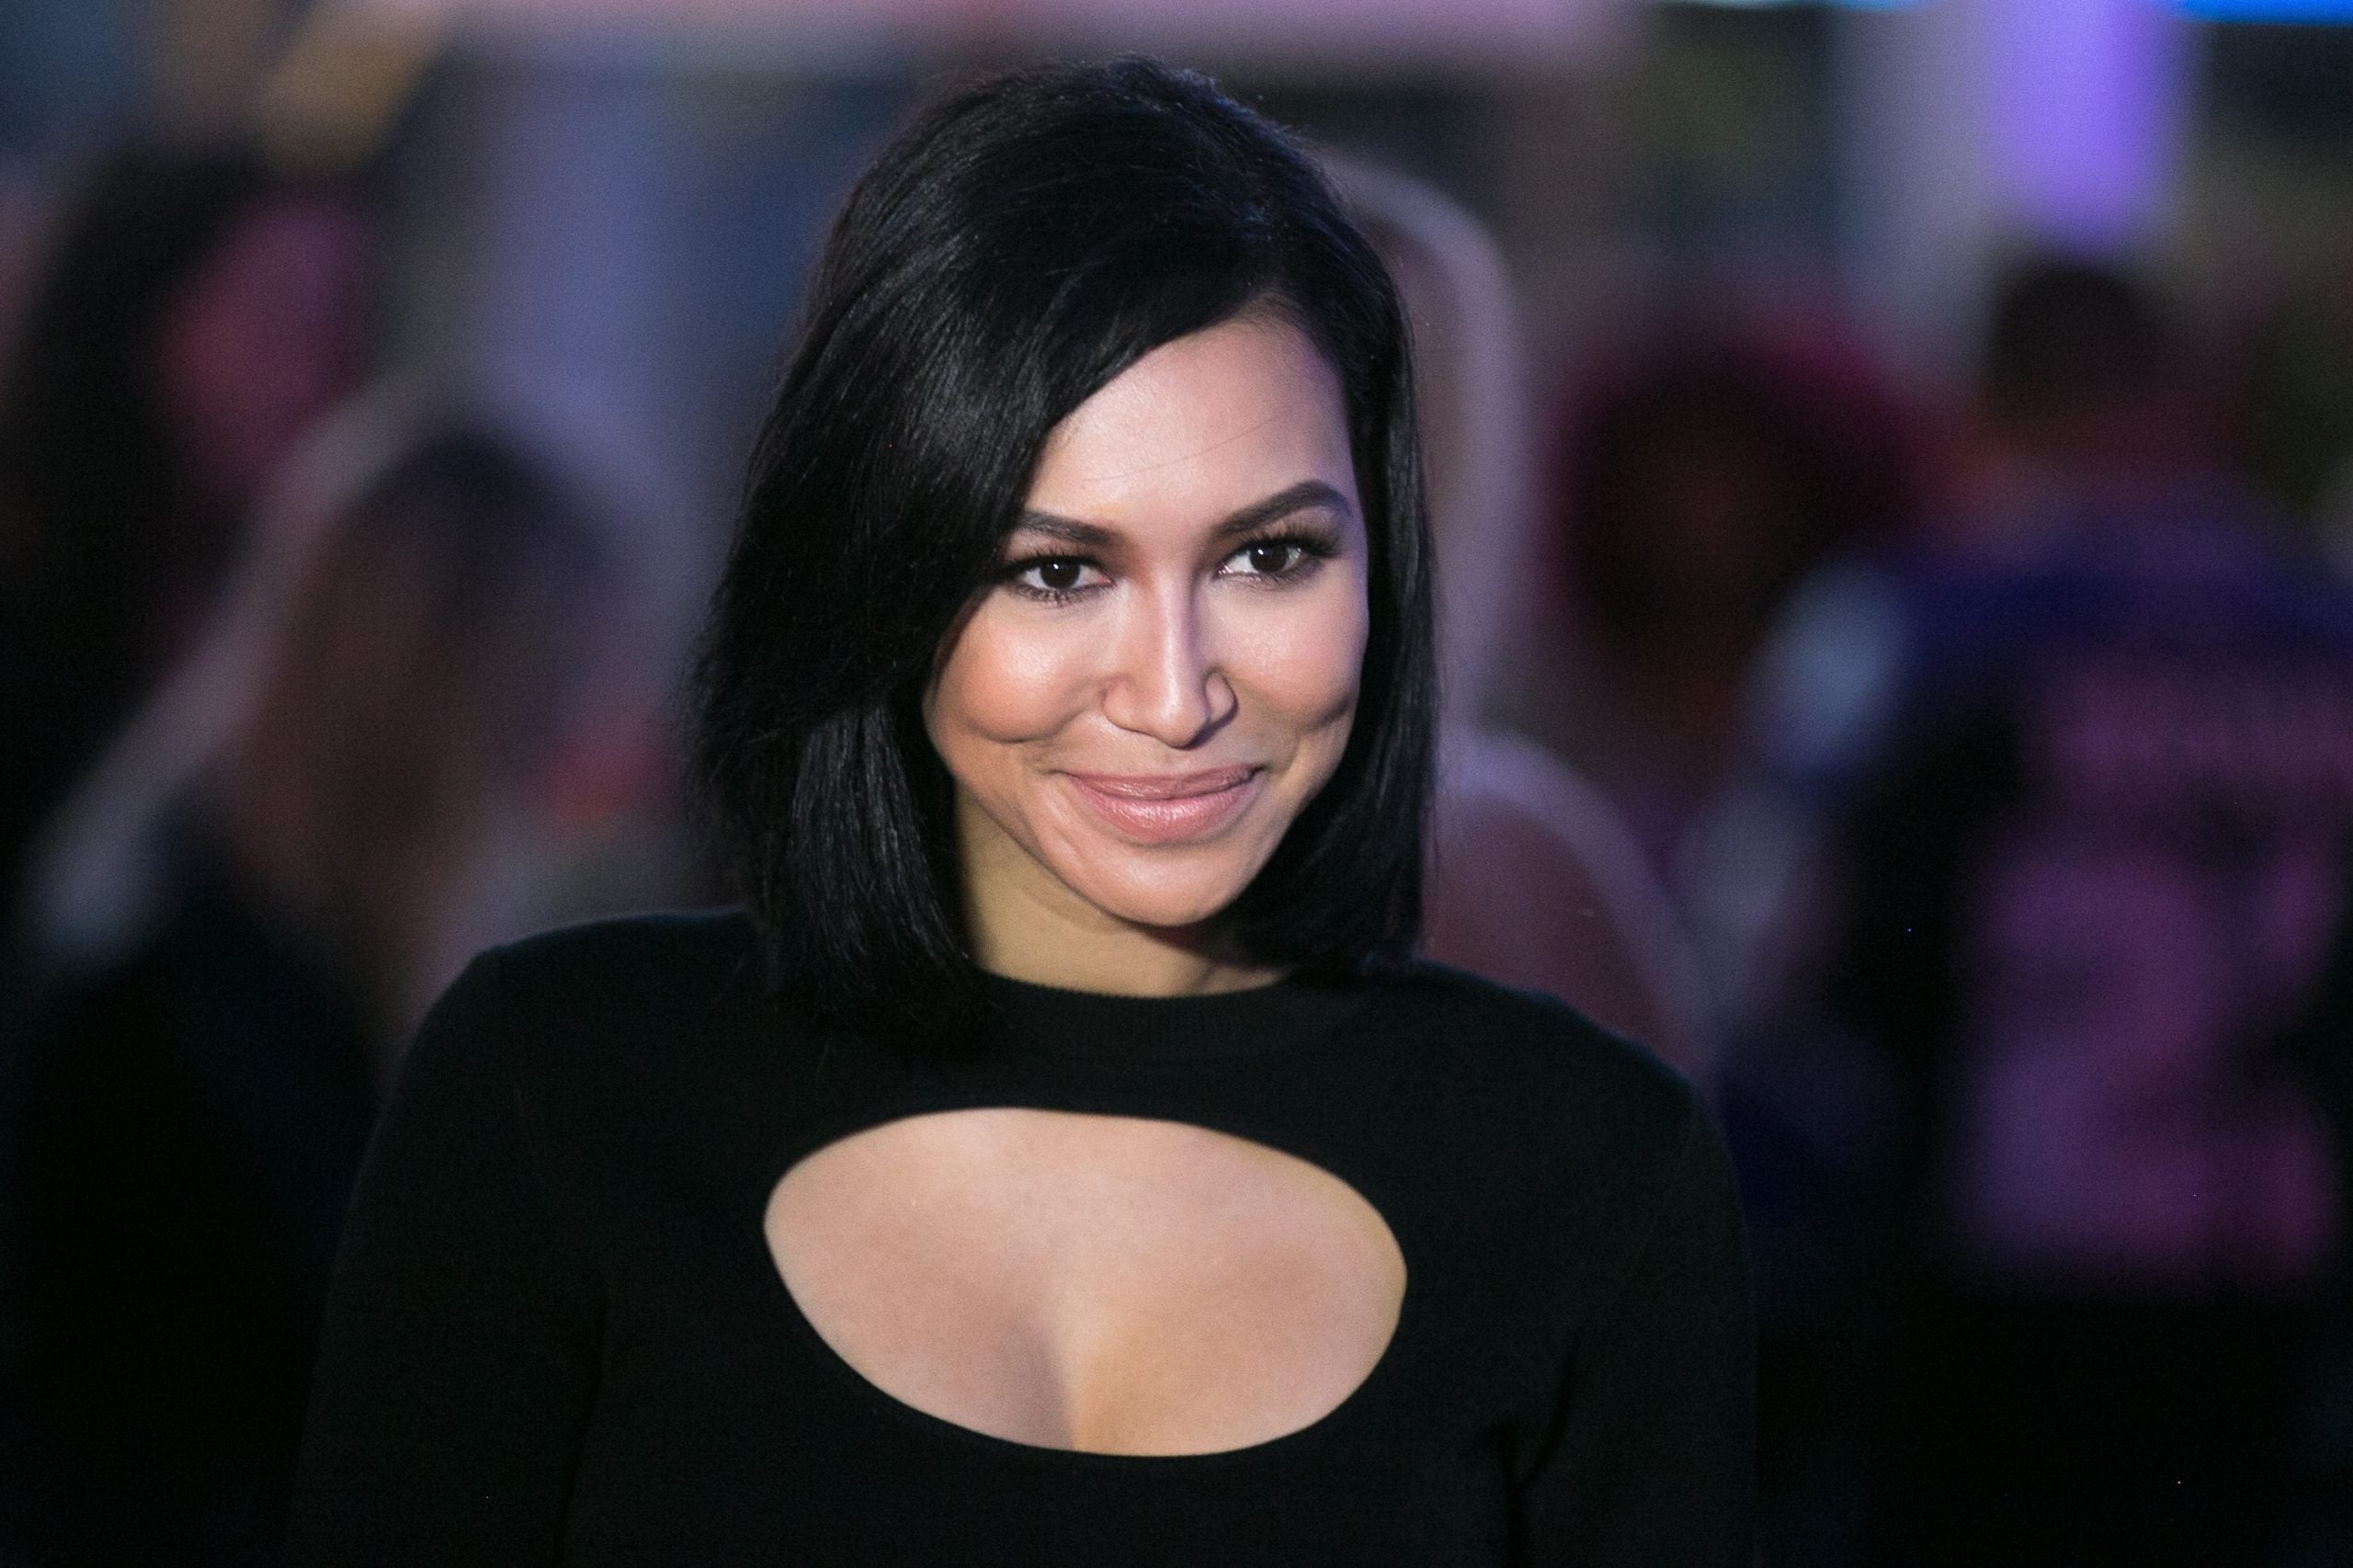 Body Recovered By Authorities After ‘Glee’ Star Naya Rivera Disappears  